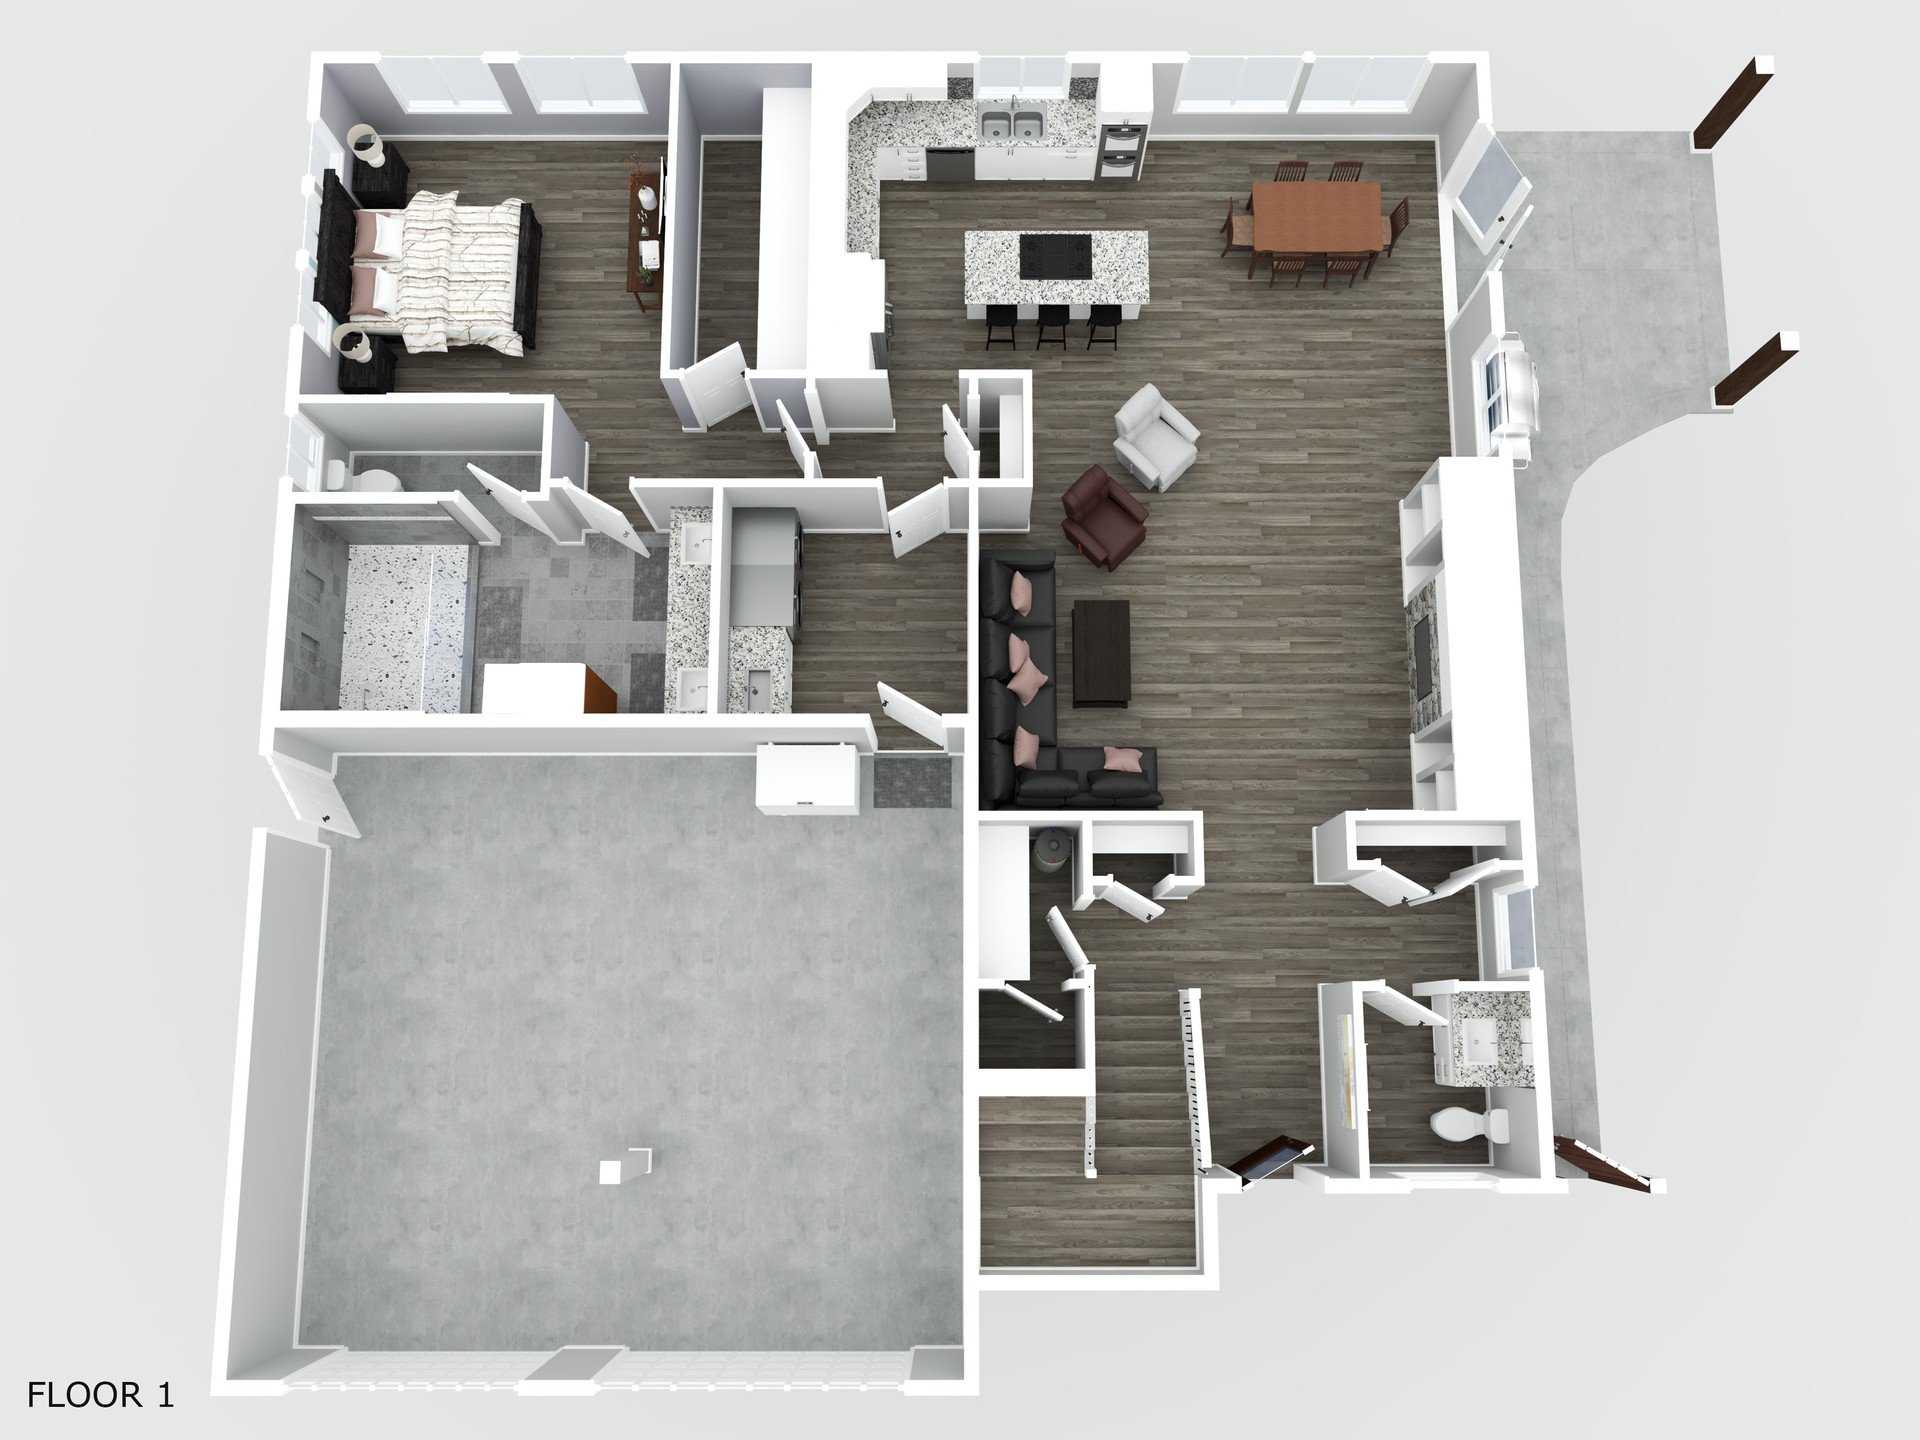 Another 3D Floor plan and a great way to illustrate how everything fits togther!